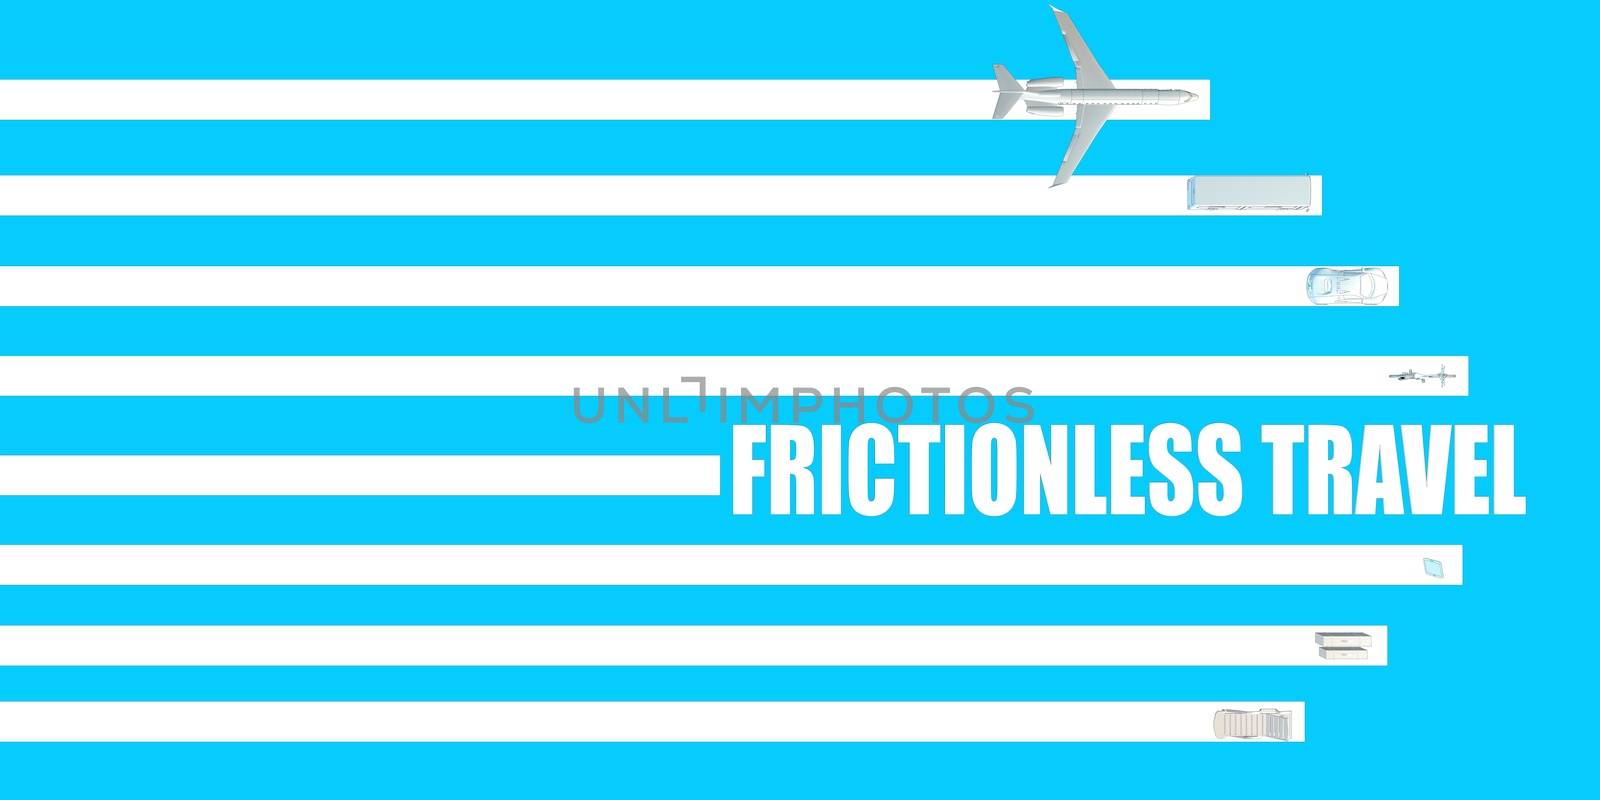 Frictionless Travel by kentoh